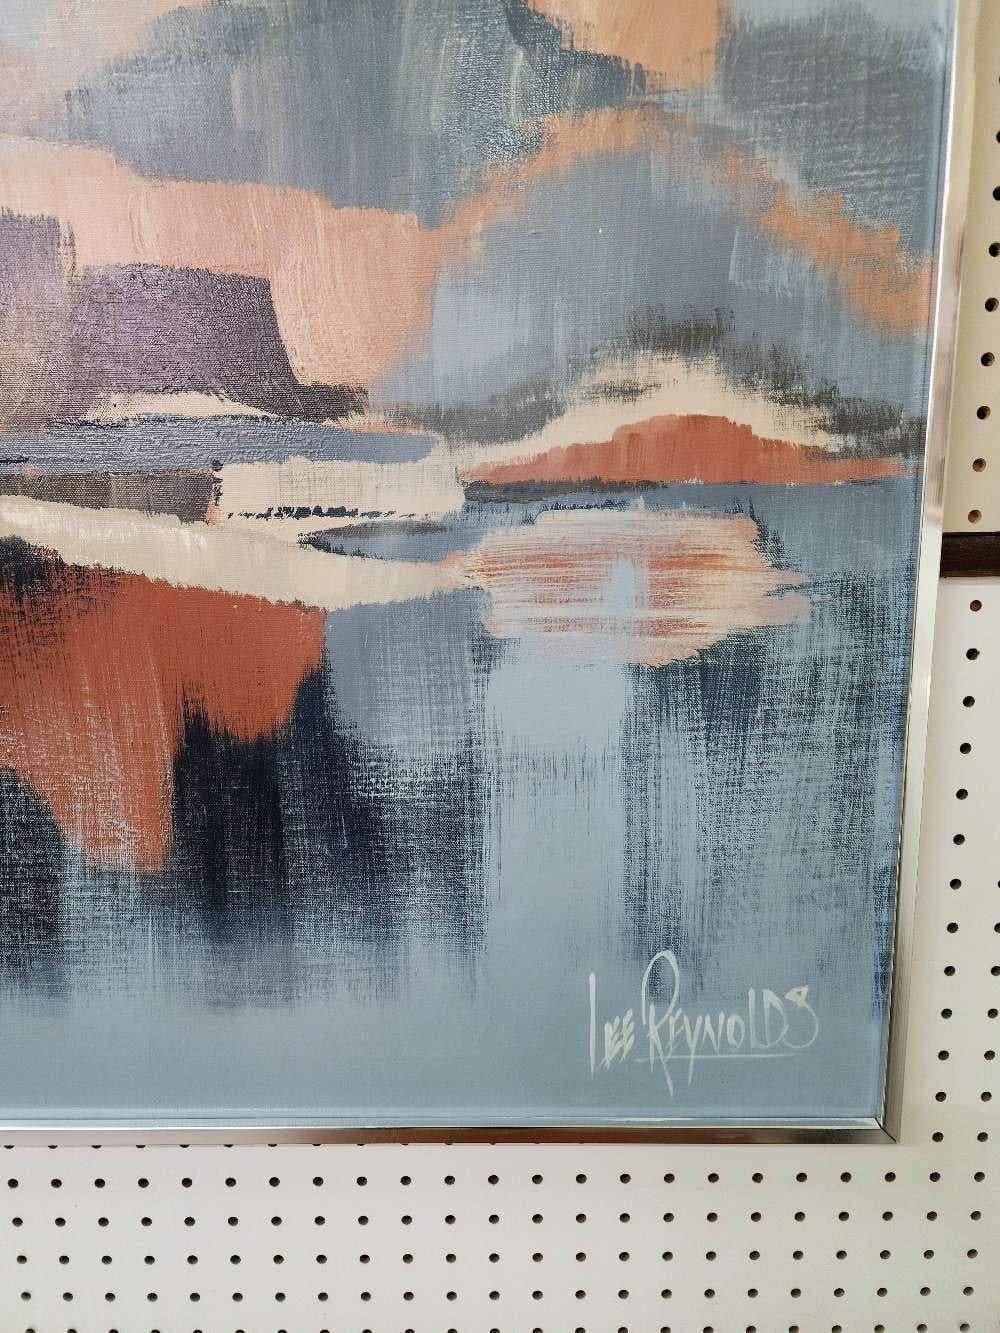 This wonderful Mid-Century Modern landscape has a unique abstract horizon along a waterfront. It could me depicted as a mountain and hill range along water. Or even a city nestled in the mountains. Large scale painting approximately 4ft x 2.5ft is